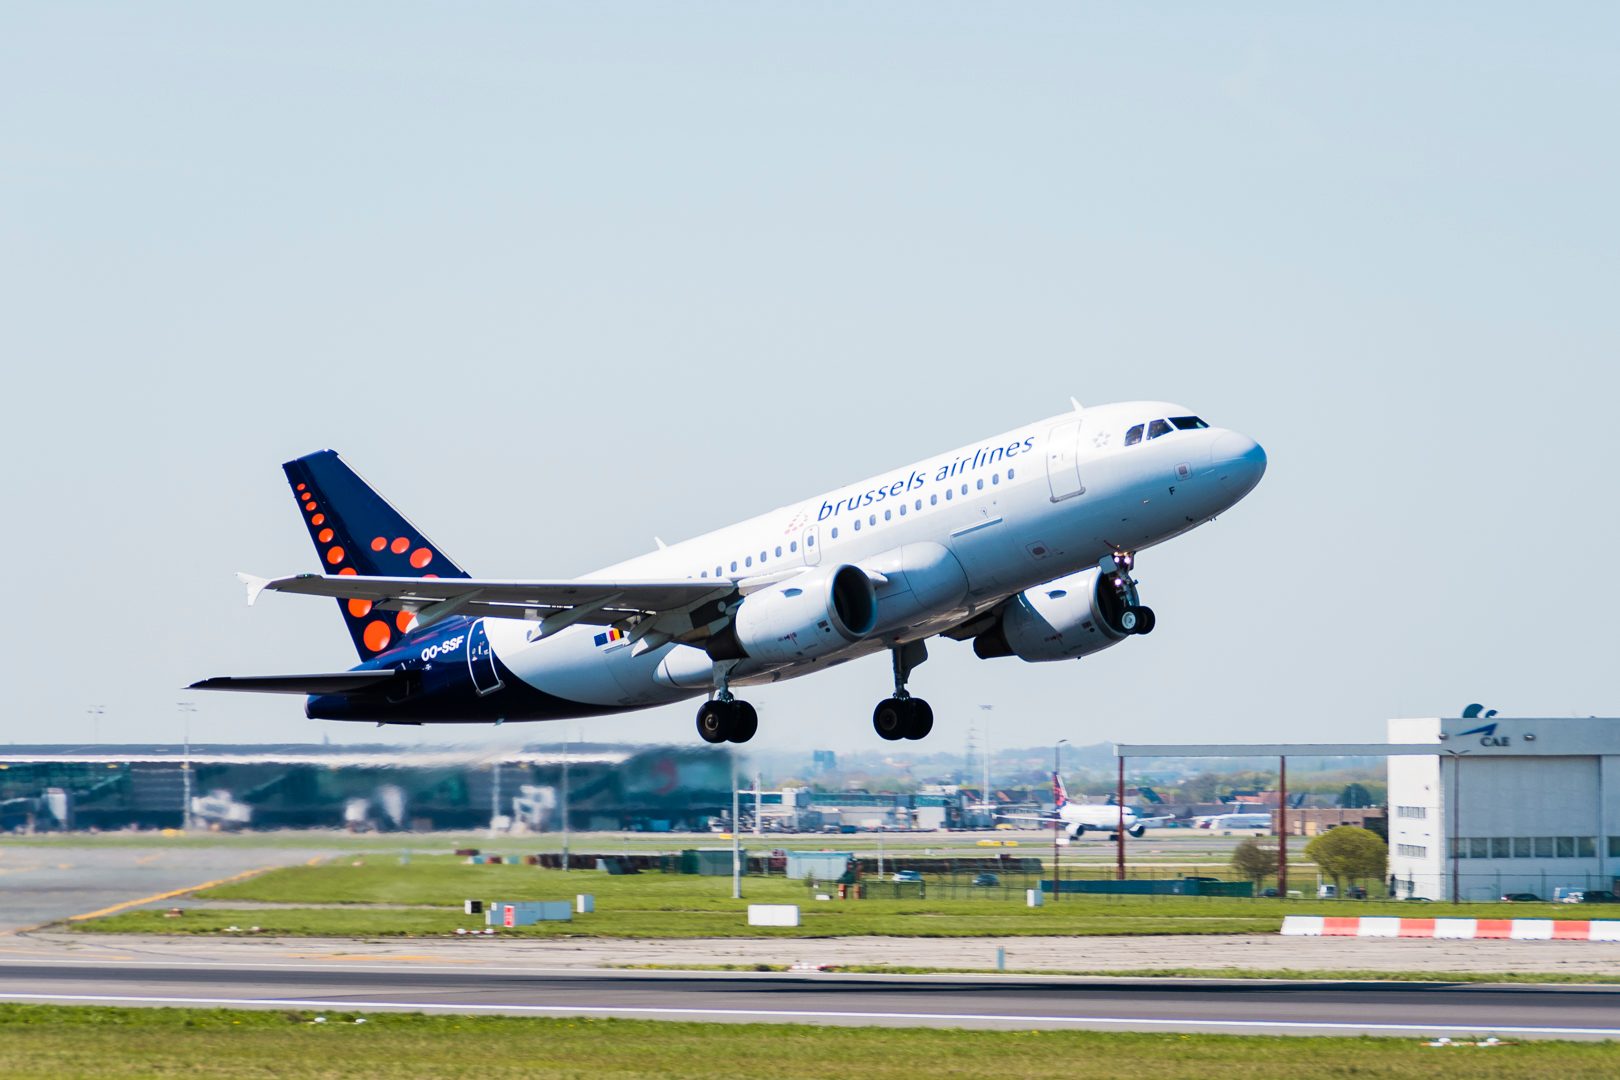 Brussels Airlines loses 182 million euros in 6 months